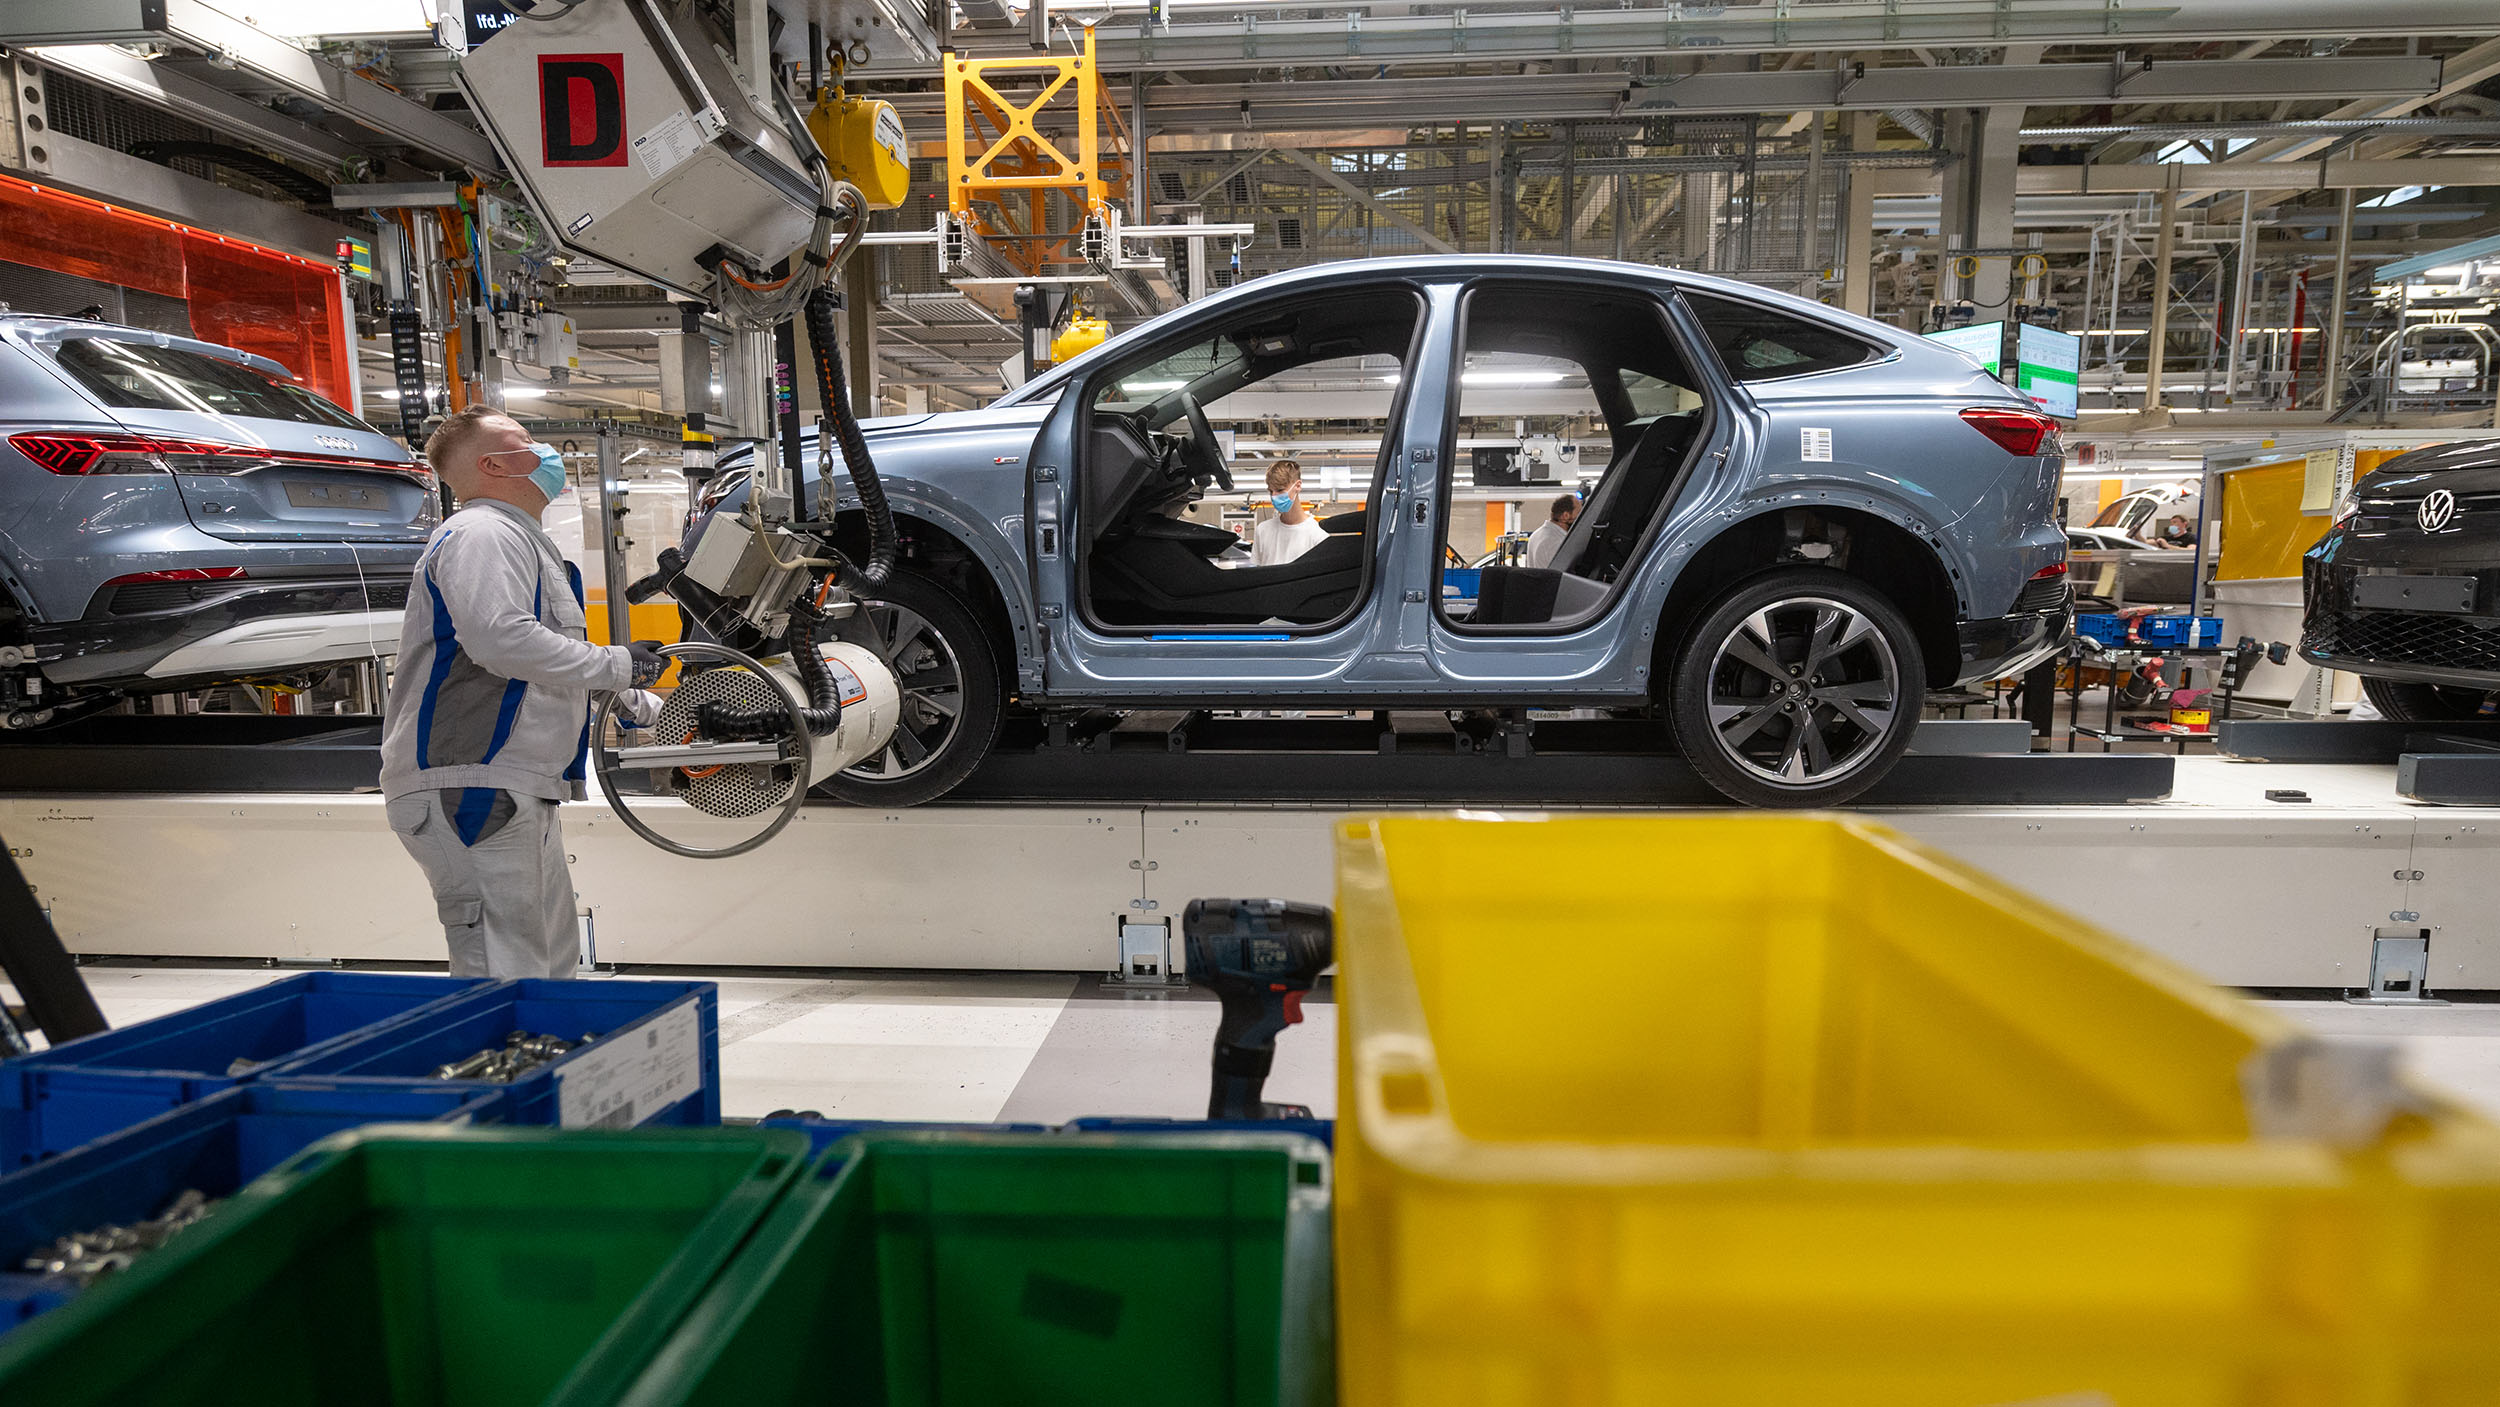 05 October 2021, Saxony, Zwickau: Employees assemble an Audi Q4 e-tron at the Volkswagen plant in Zwickau. A good six months after the launch of the SUV, Zwickau has become Audi's largest production site for electric vehicles. In addition to the VW plant in Zwickau, Audi also builds fully electric vehicles in Neckarsulm and Brussels. The first electric car planned for the Ingolstadt headquarters is the Q6, which is scheduled for market launch in 2023. Audi returned to its founding location with the production of the Q4 e-tron. Photo: Hendrik Schmidt, Europress/AFP)